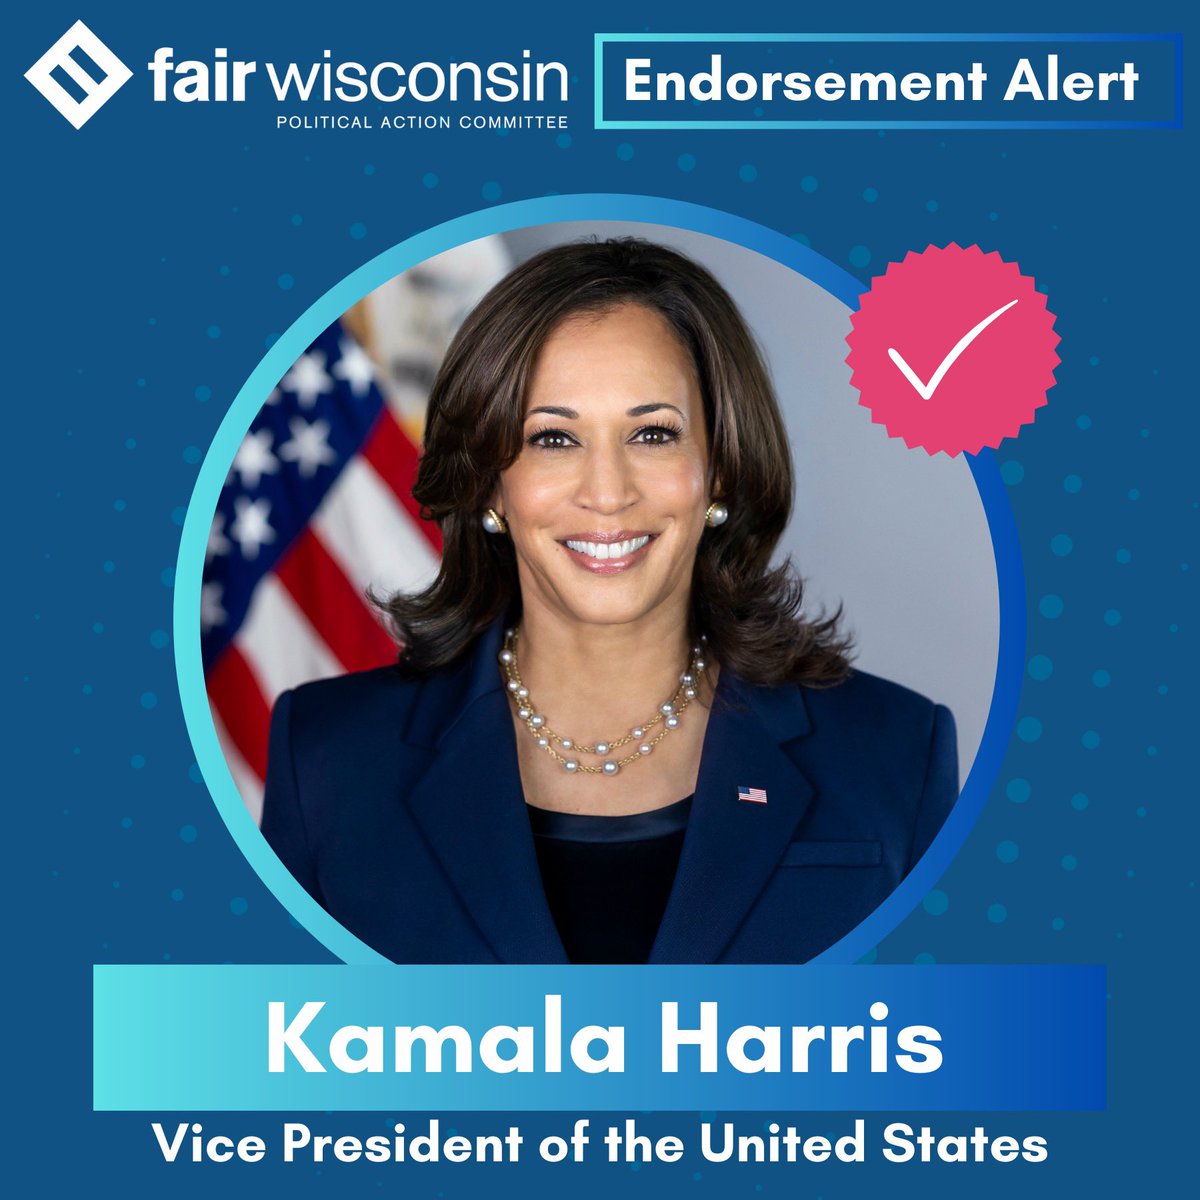 Fair Wisconsin PAC is proud to endorse President Joe Biden and Vice President Kamala Harris for re-election. The Biden-Harris administration has been the most pro-LGBTQ+ administration our country has ever seen. (1/4)